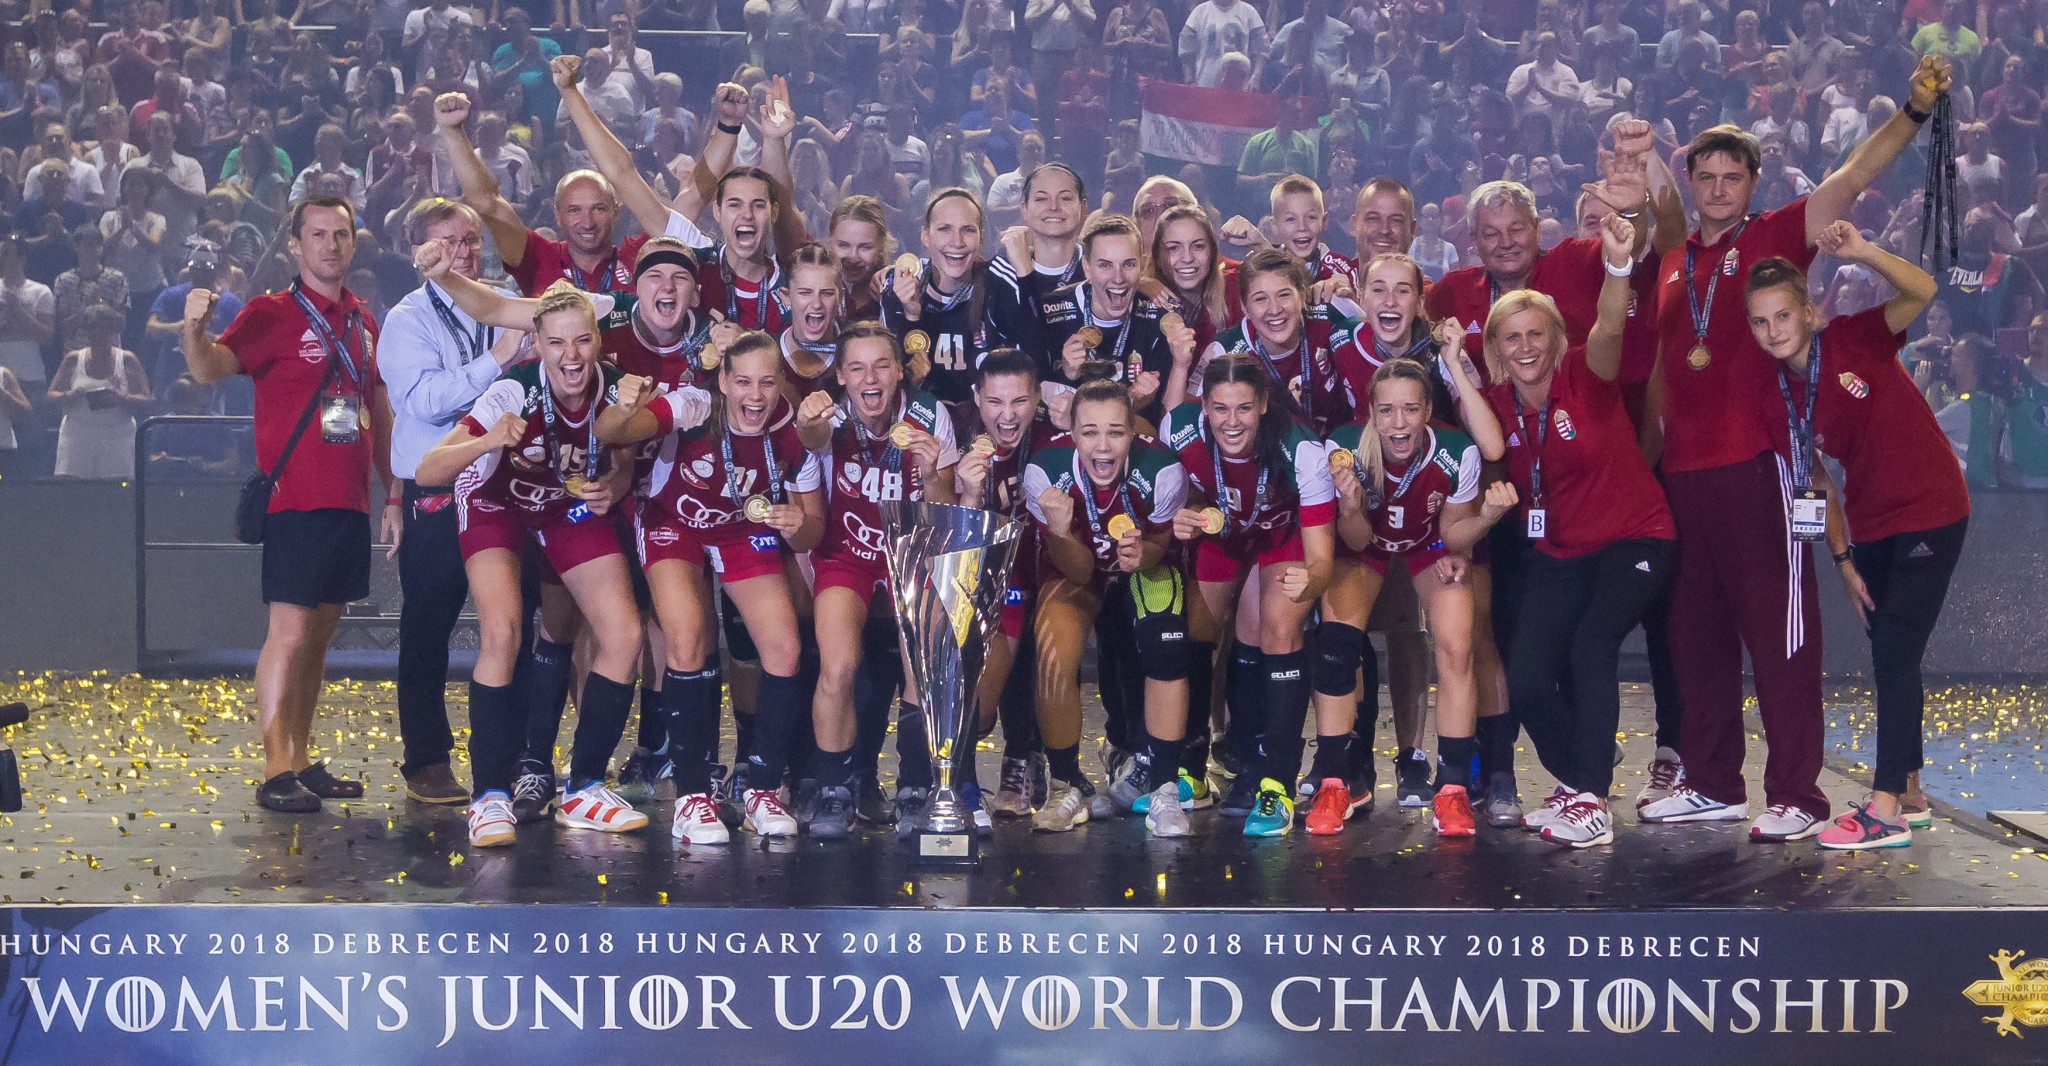 Hungary won the world junior title on home soil ©IHF